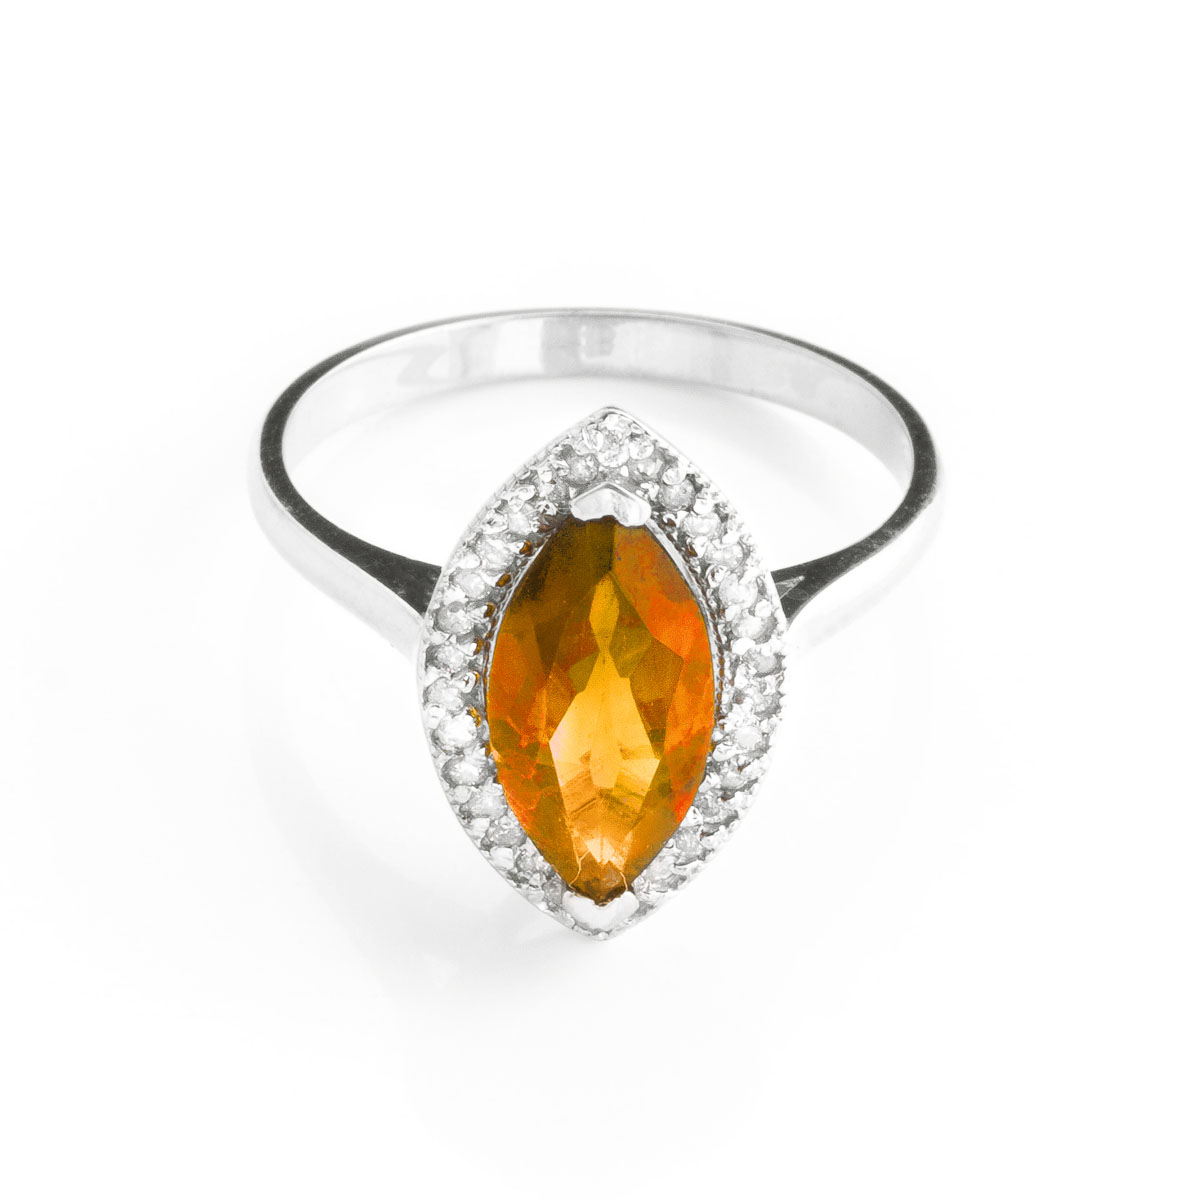 Citrine Halo Ring 1.8 ctw in Sterling Silver